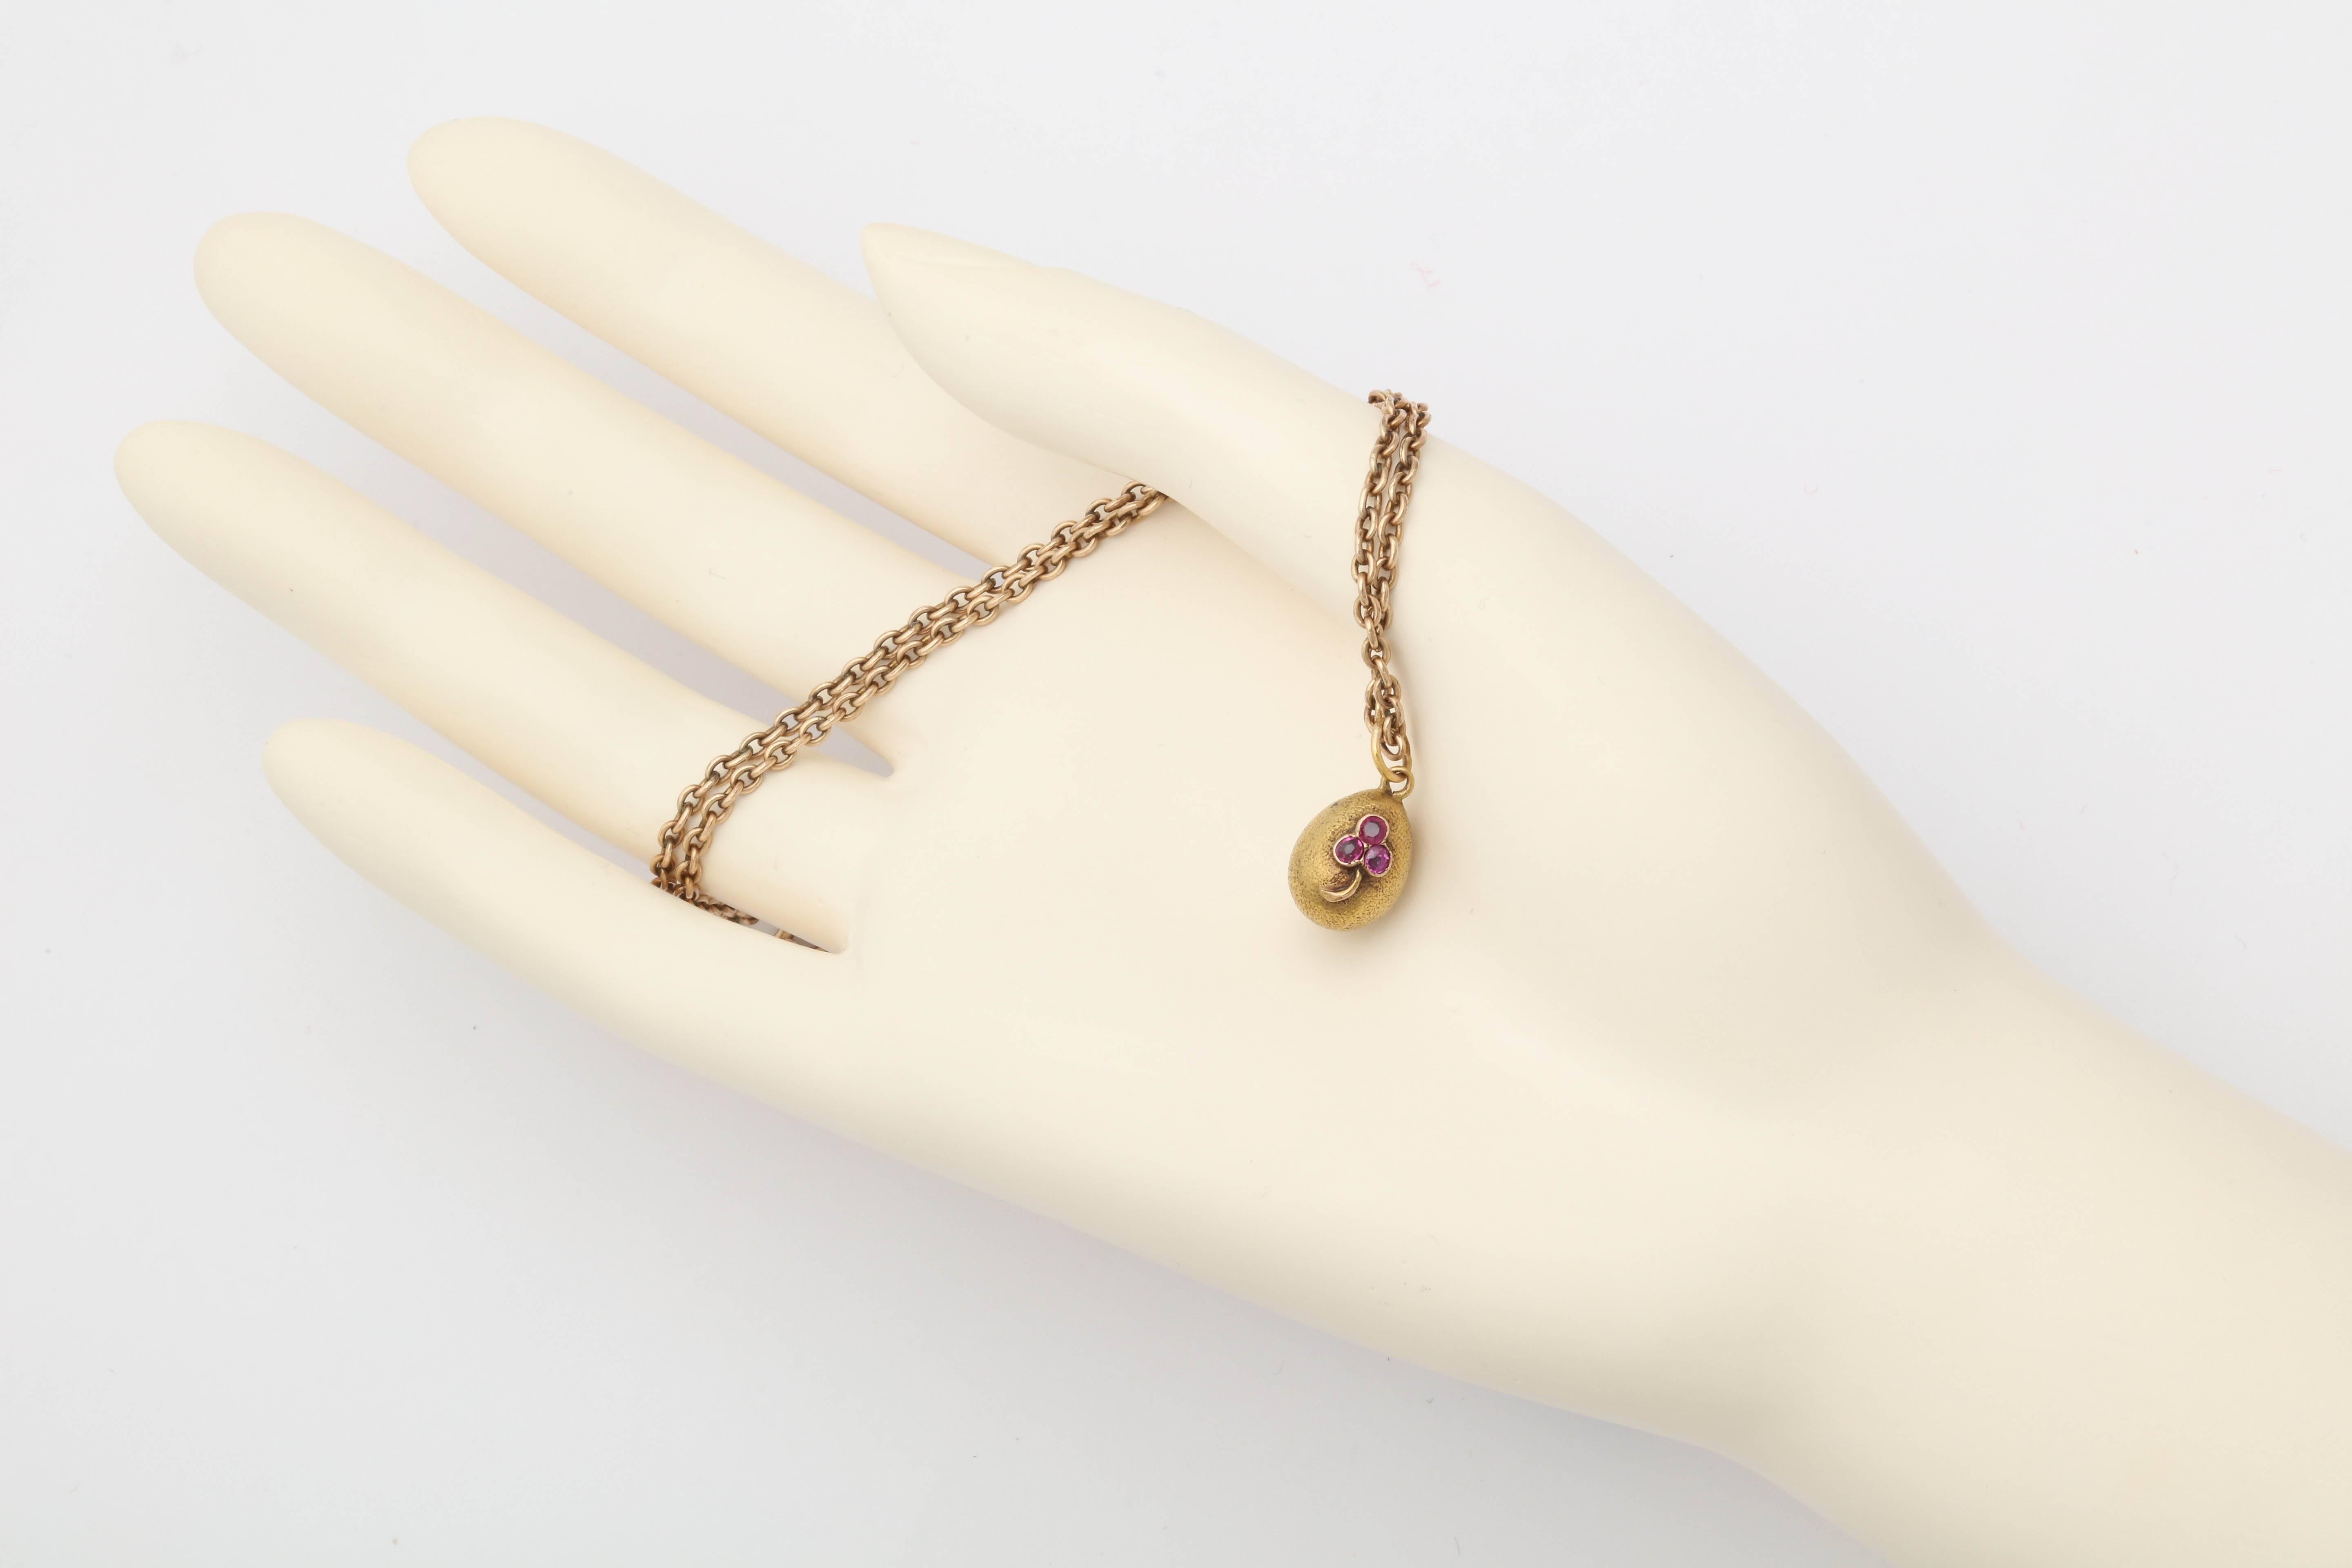 A rare Russian miniature gold egg pendant from the Romanov era, period of Nicholas II set with rubies in a 3 leaf clover motif on a textured gold base, attached to a gold suspension ring.

Stamped 56, circa 1900.

3/4 in. (1.9 cm) long including